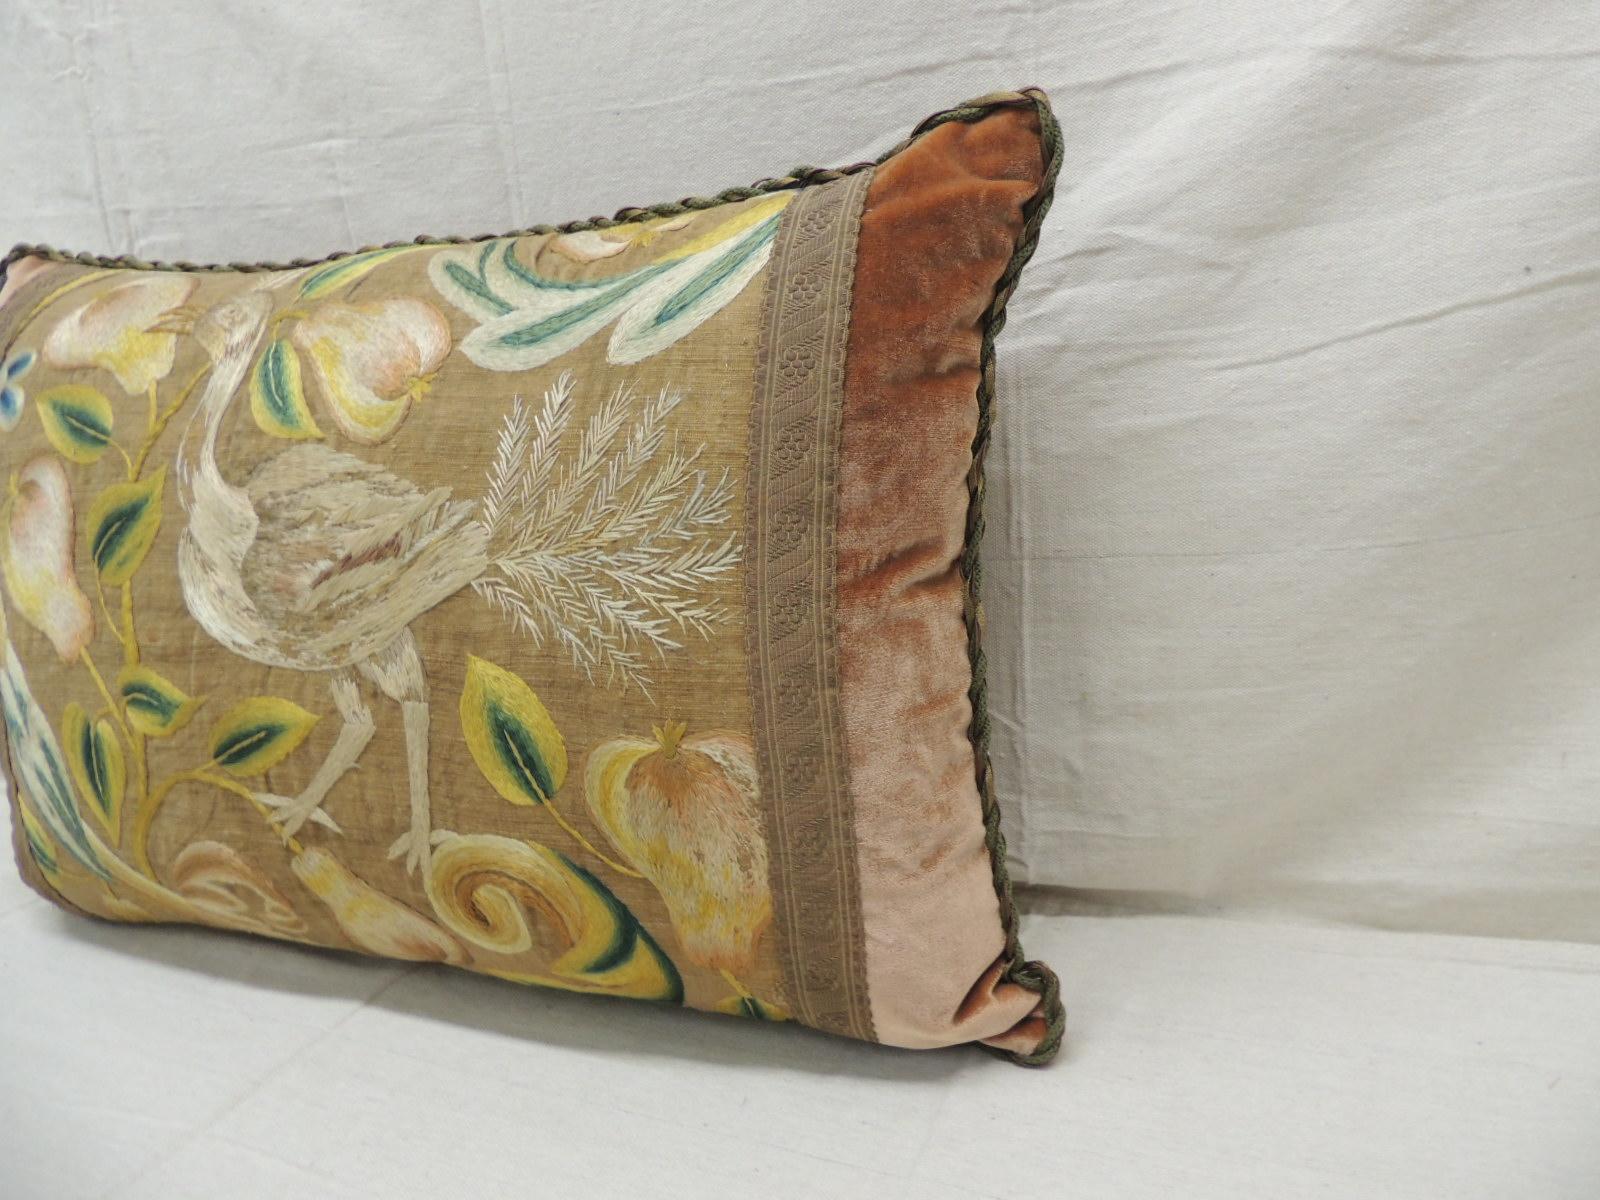 Hand-Crafted Antique Venetian Floral and Bird Embroidered Large Bolster Decorative Pillow